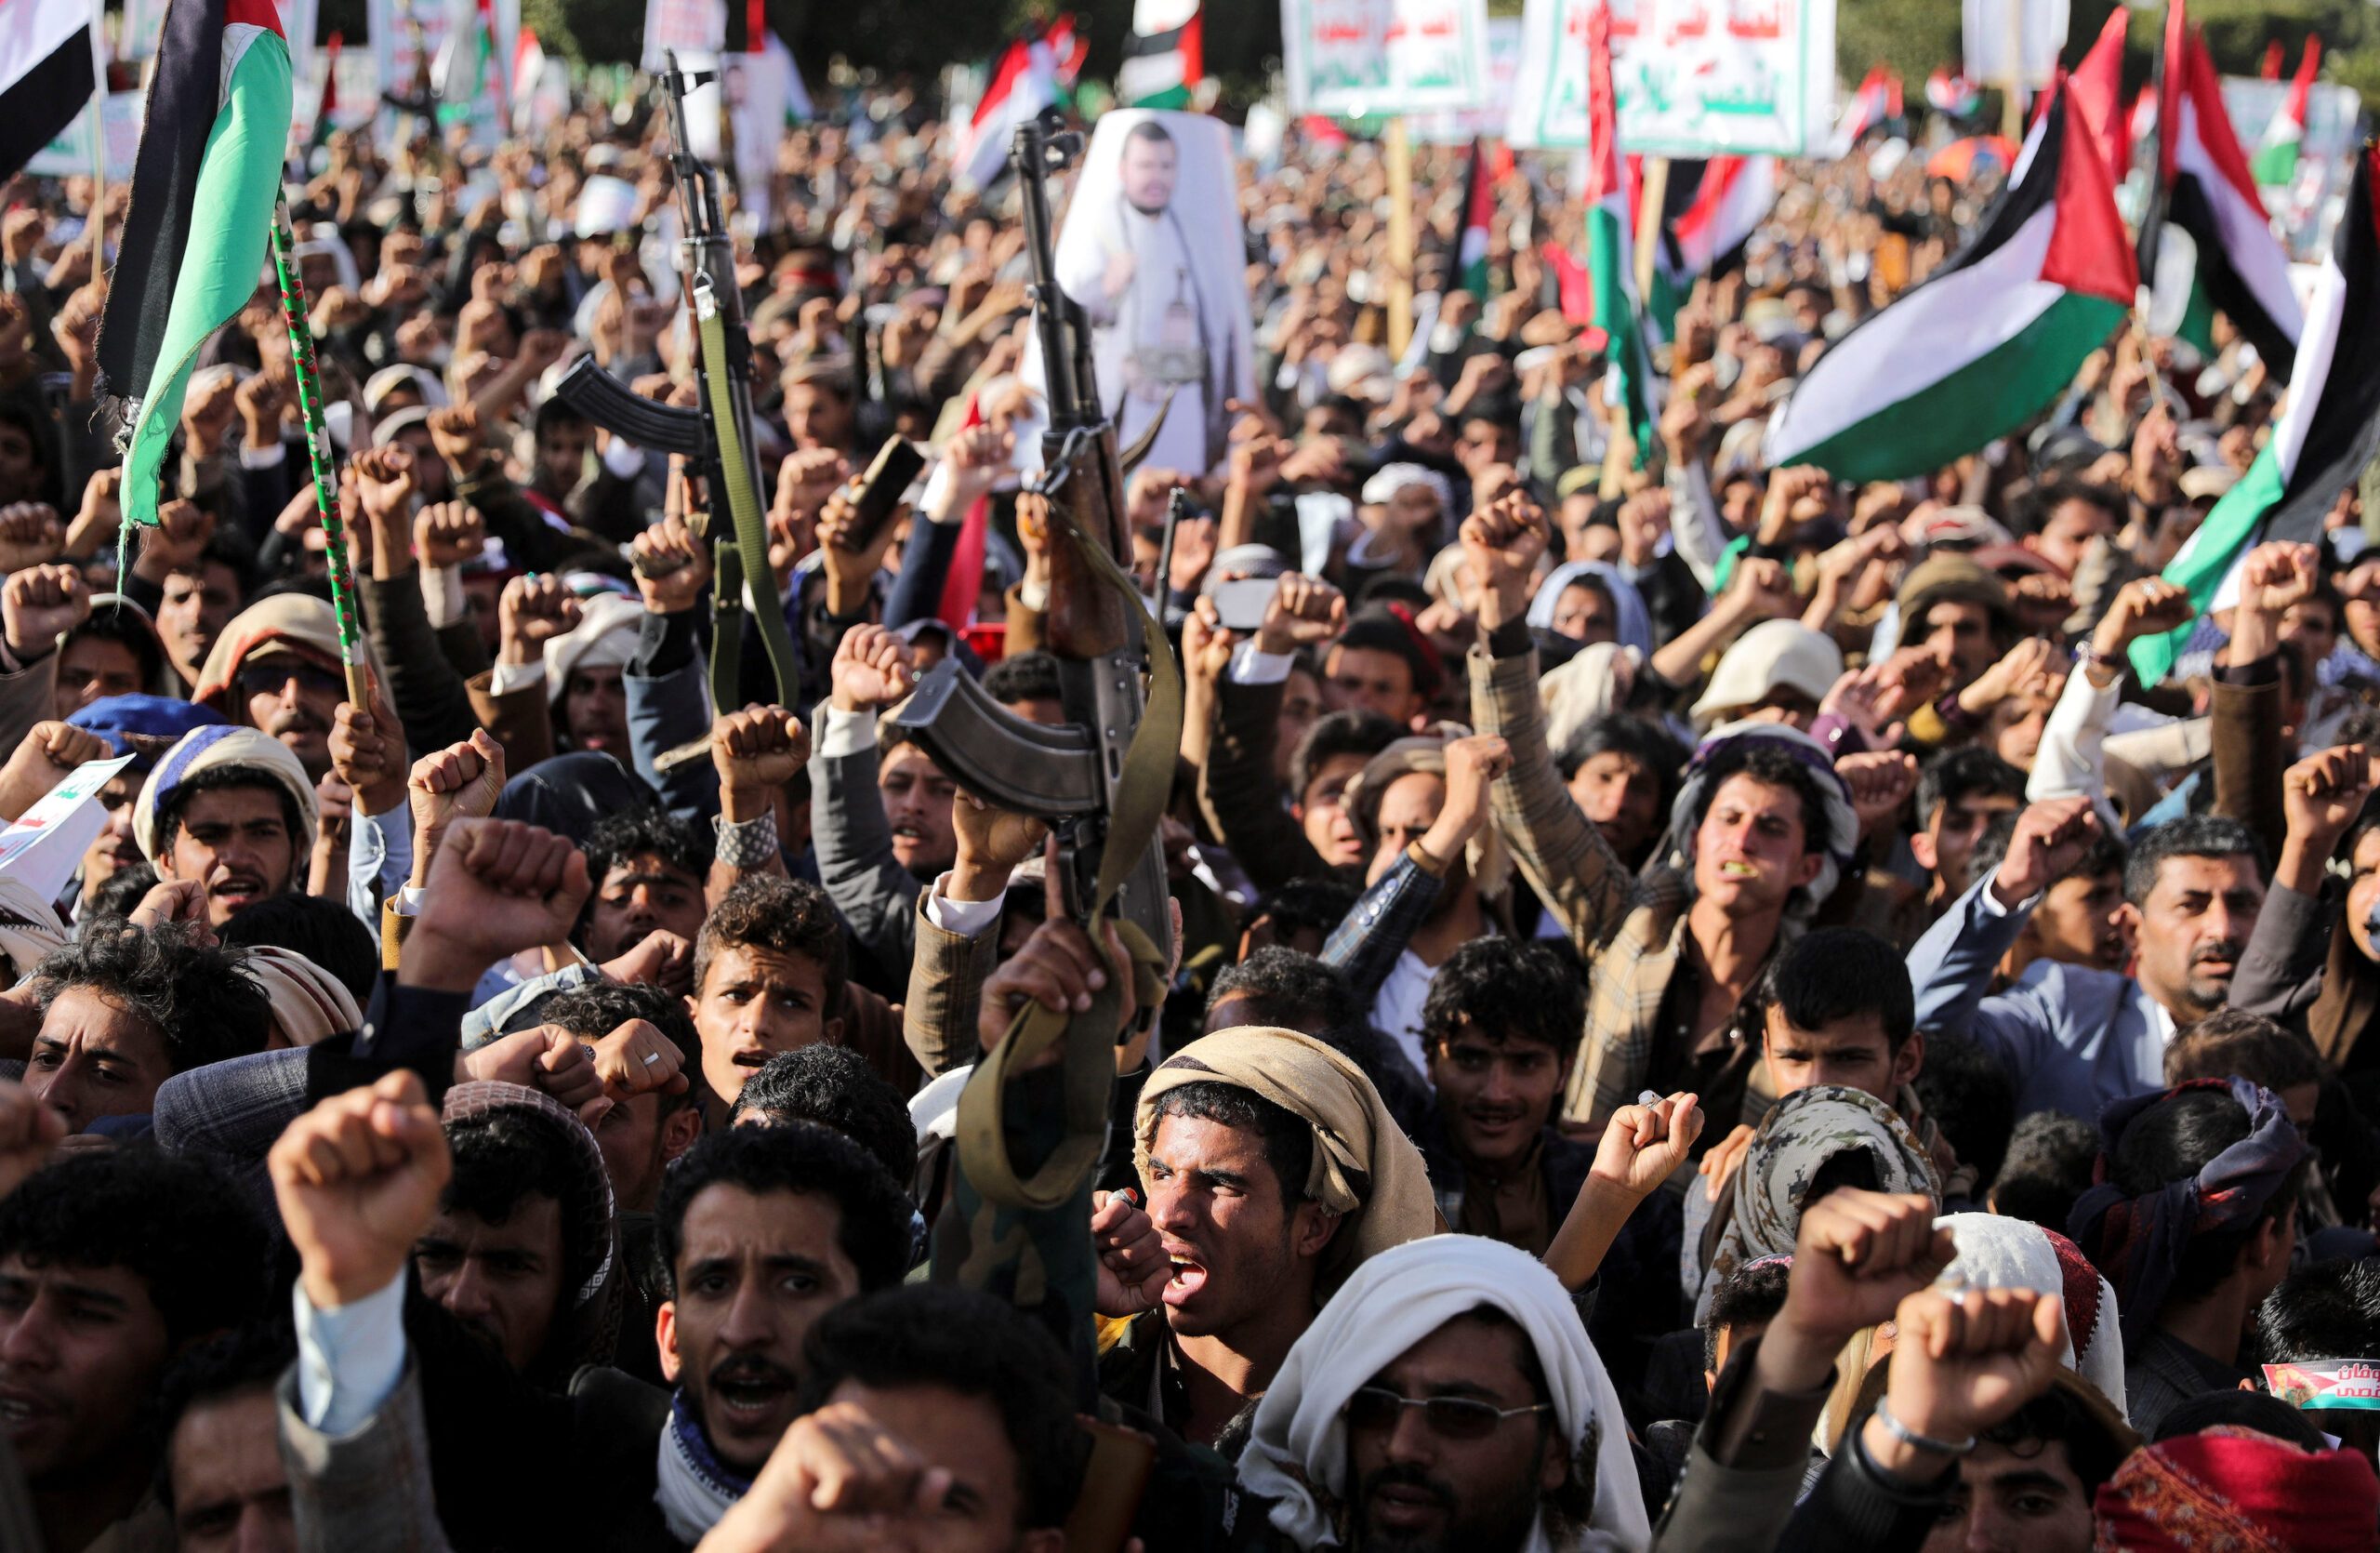 Houthi supporters in Sanaa protest at the US and UK airstrikes – but the military action has done little to shift oil prices